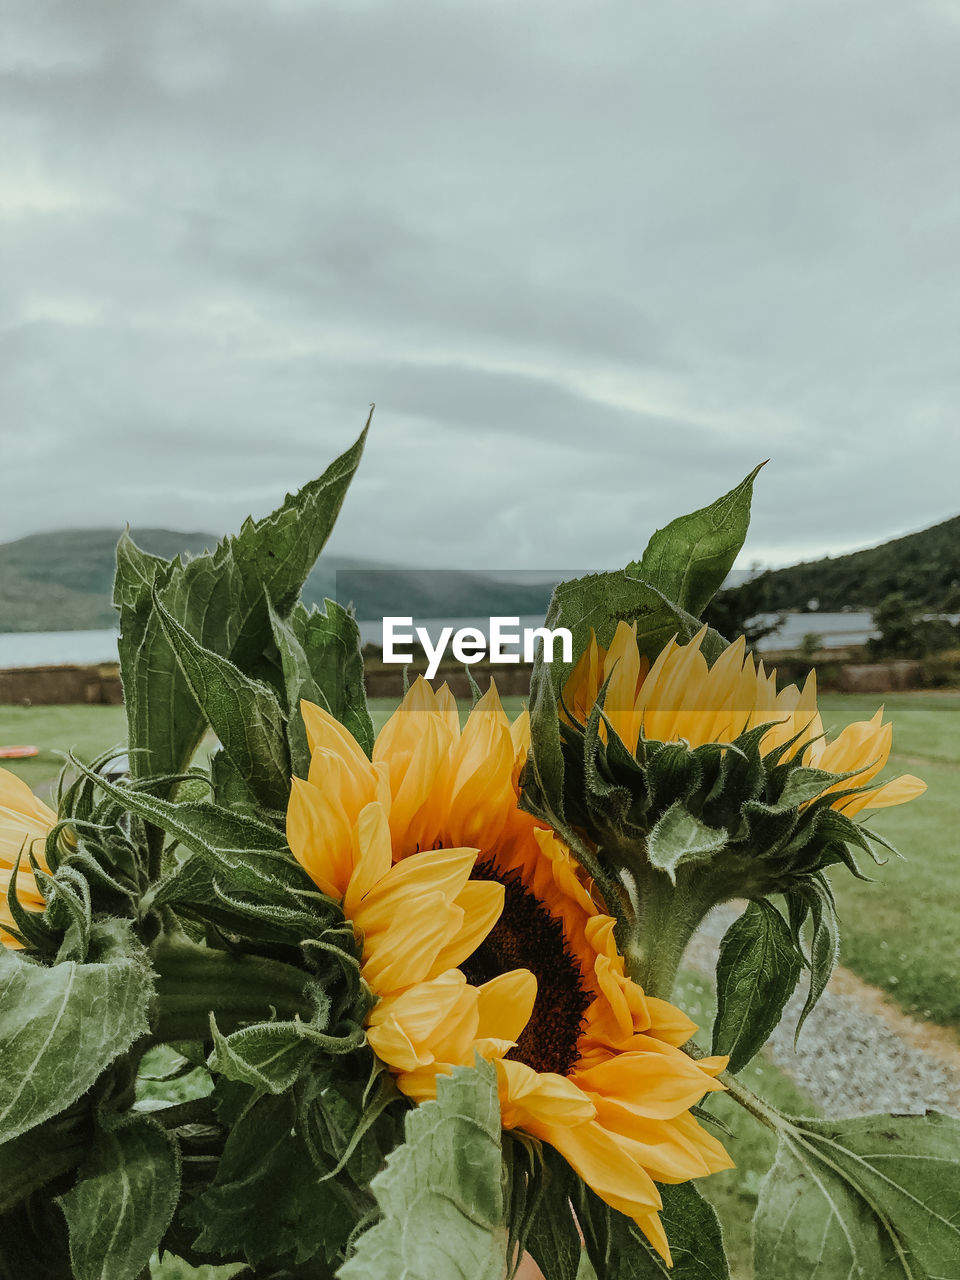 sunflower, flower, flowering plant, plant, beauty in nature, nature, freshness, yellow, cloud, flower head, fragility, sky, growth, petal, no people, leaf, plant part, sunflower seed, inflorescence, land, close-up, day, field, water, outdoors, sea, green